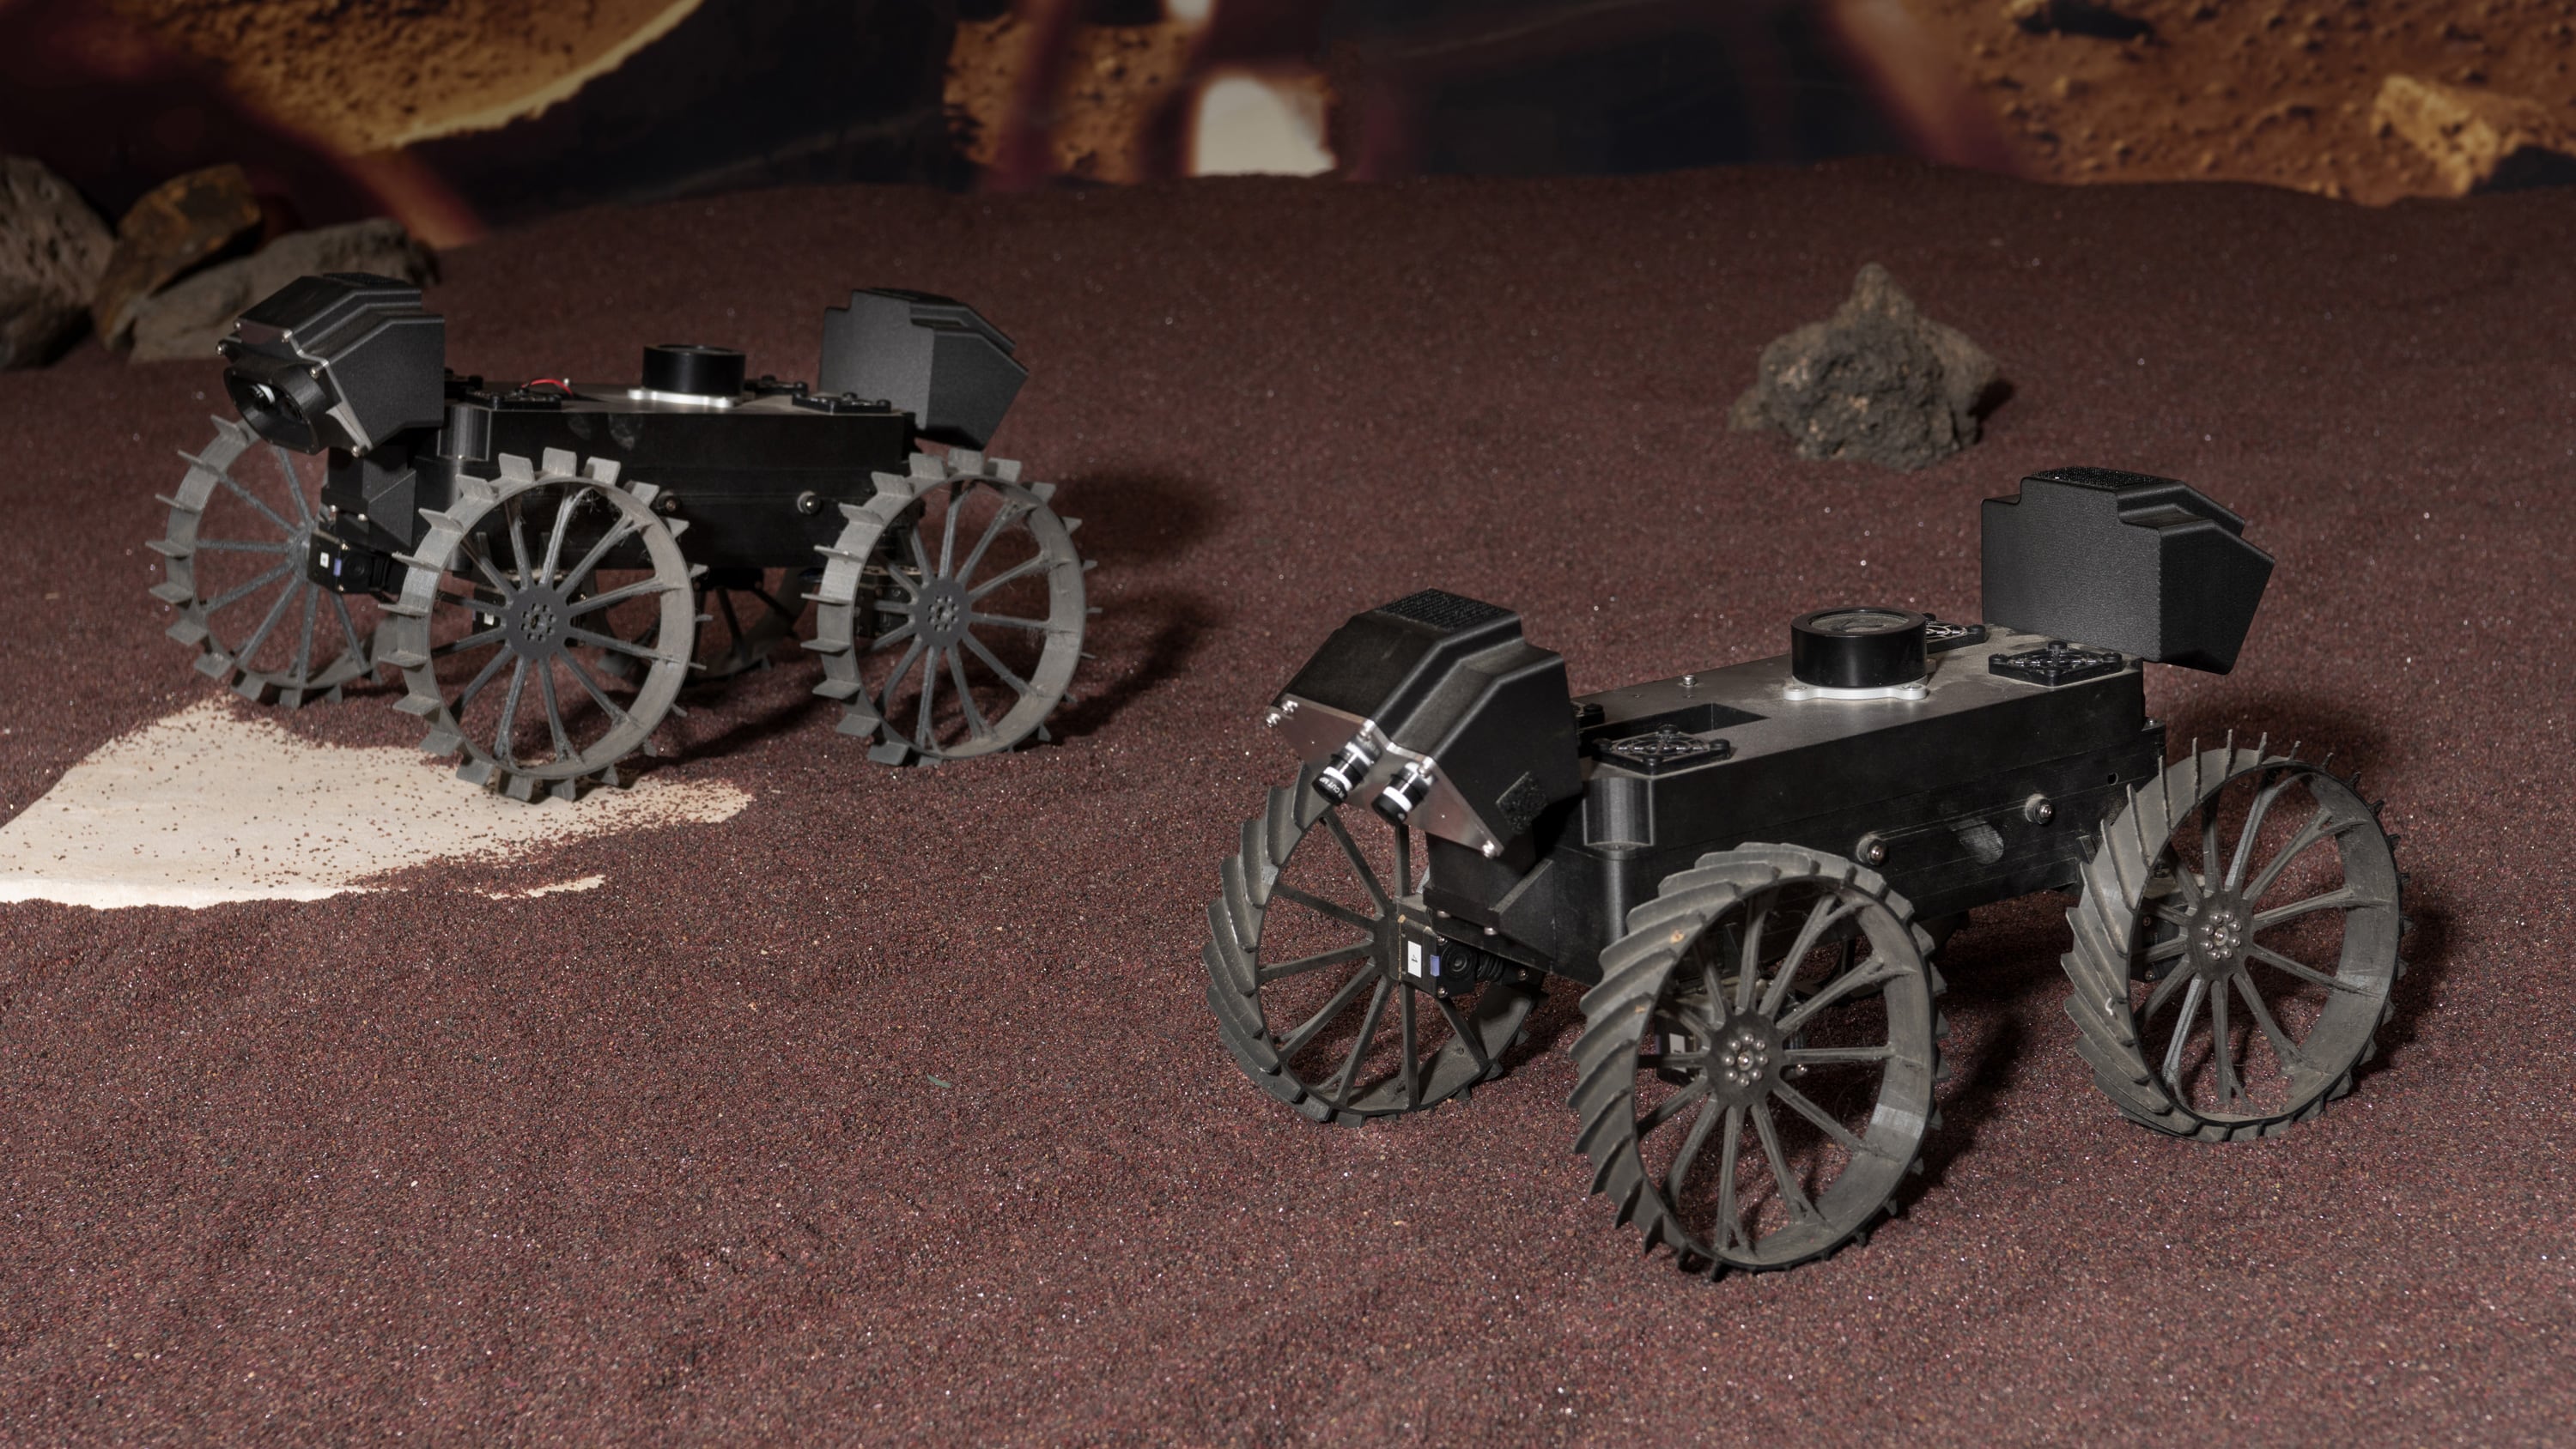 Mini rovers designed by NASA to map the surface of the Moon. 